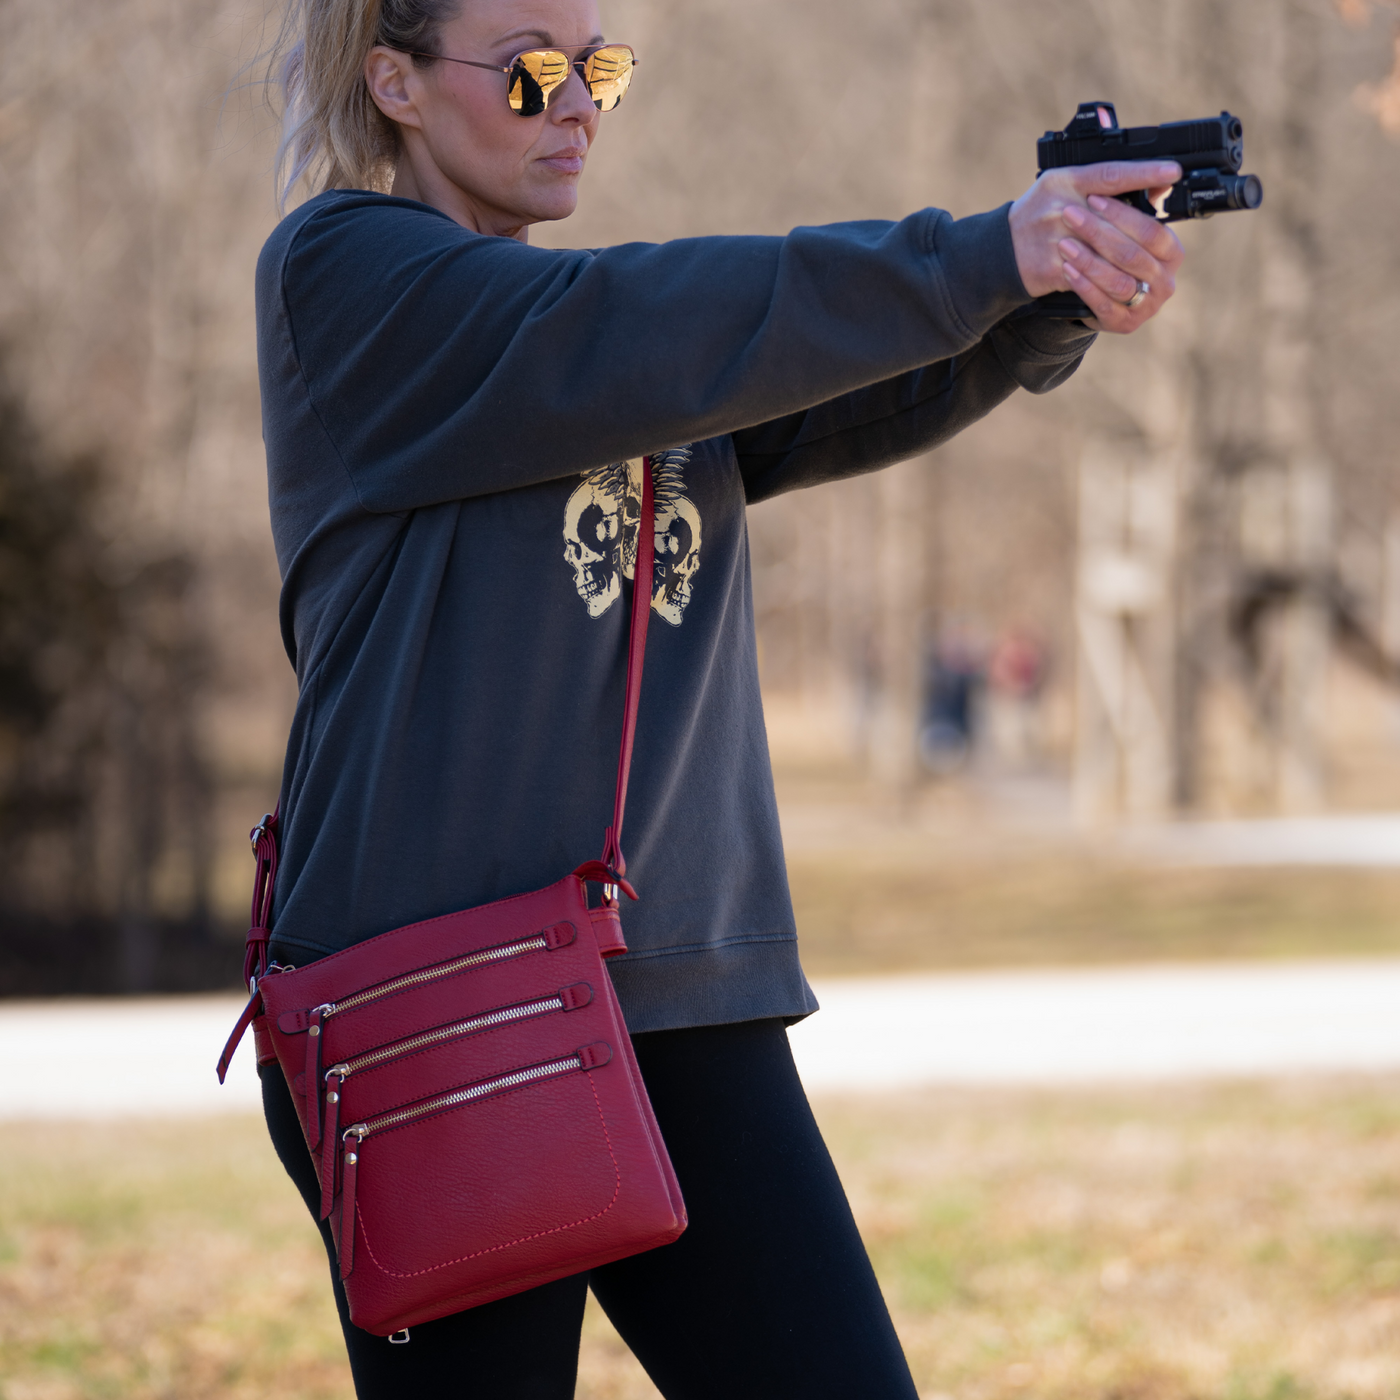 Piper Concealed Carry Lock and Key Crossbody